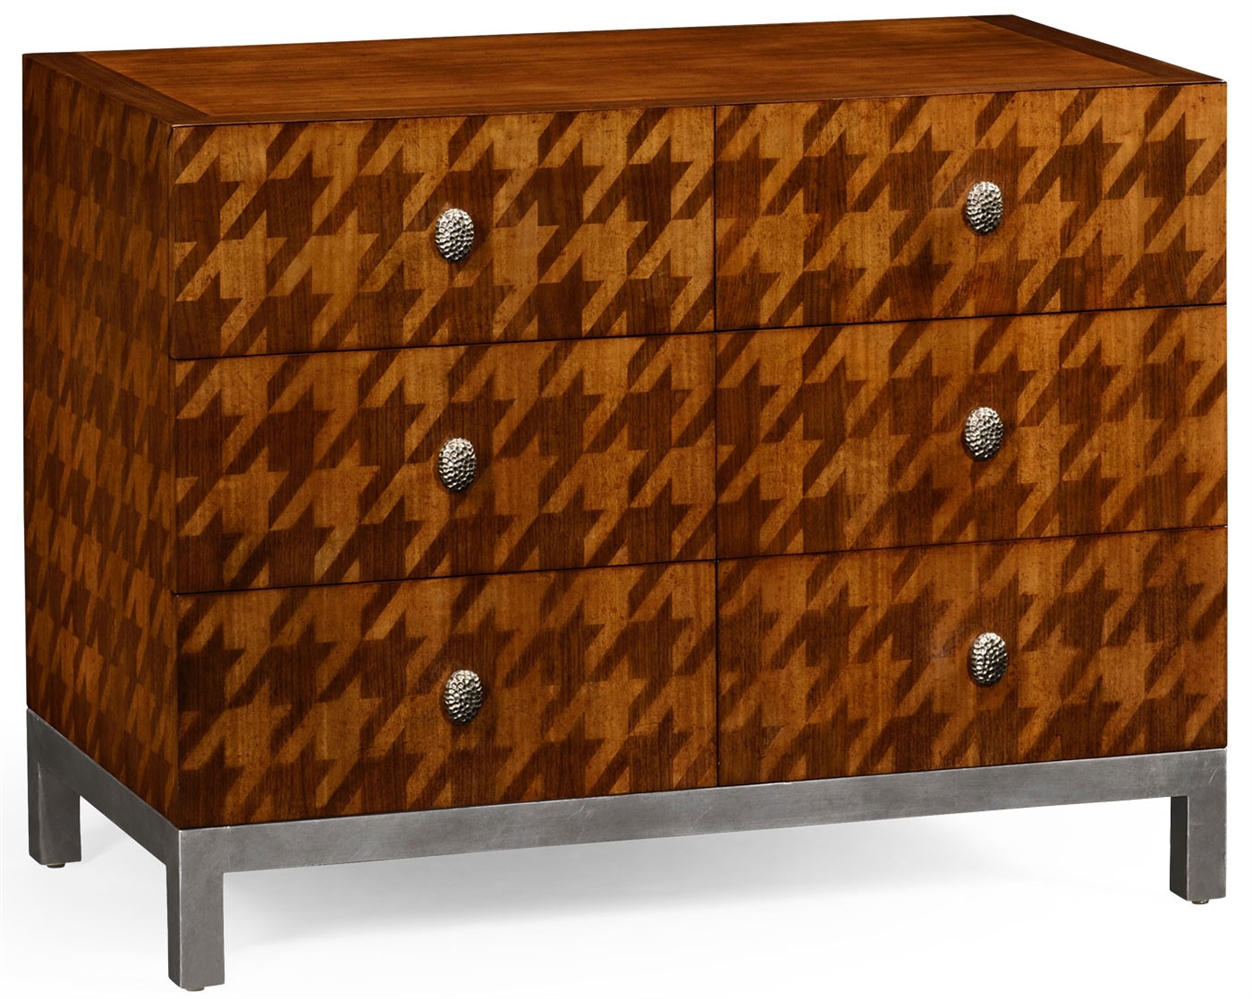 Houndstooth chest of drawer.